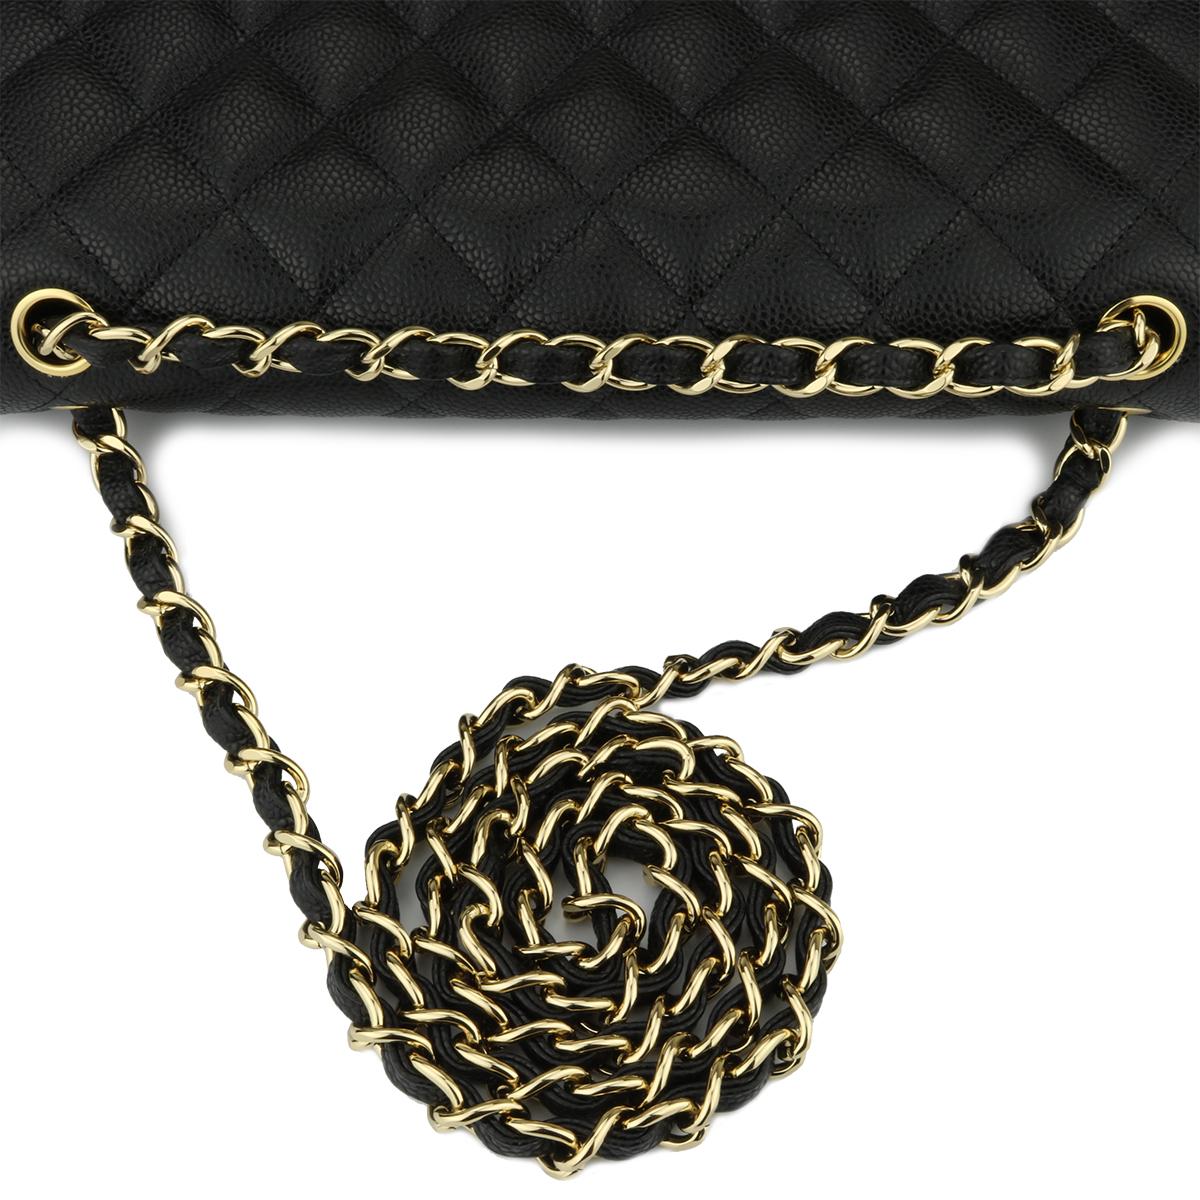 CHANEL Classic Jumbo Double Flap Bag Black Caviar with Gold Hardware 2014 8